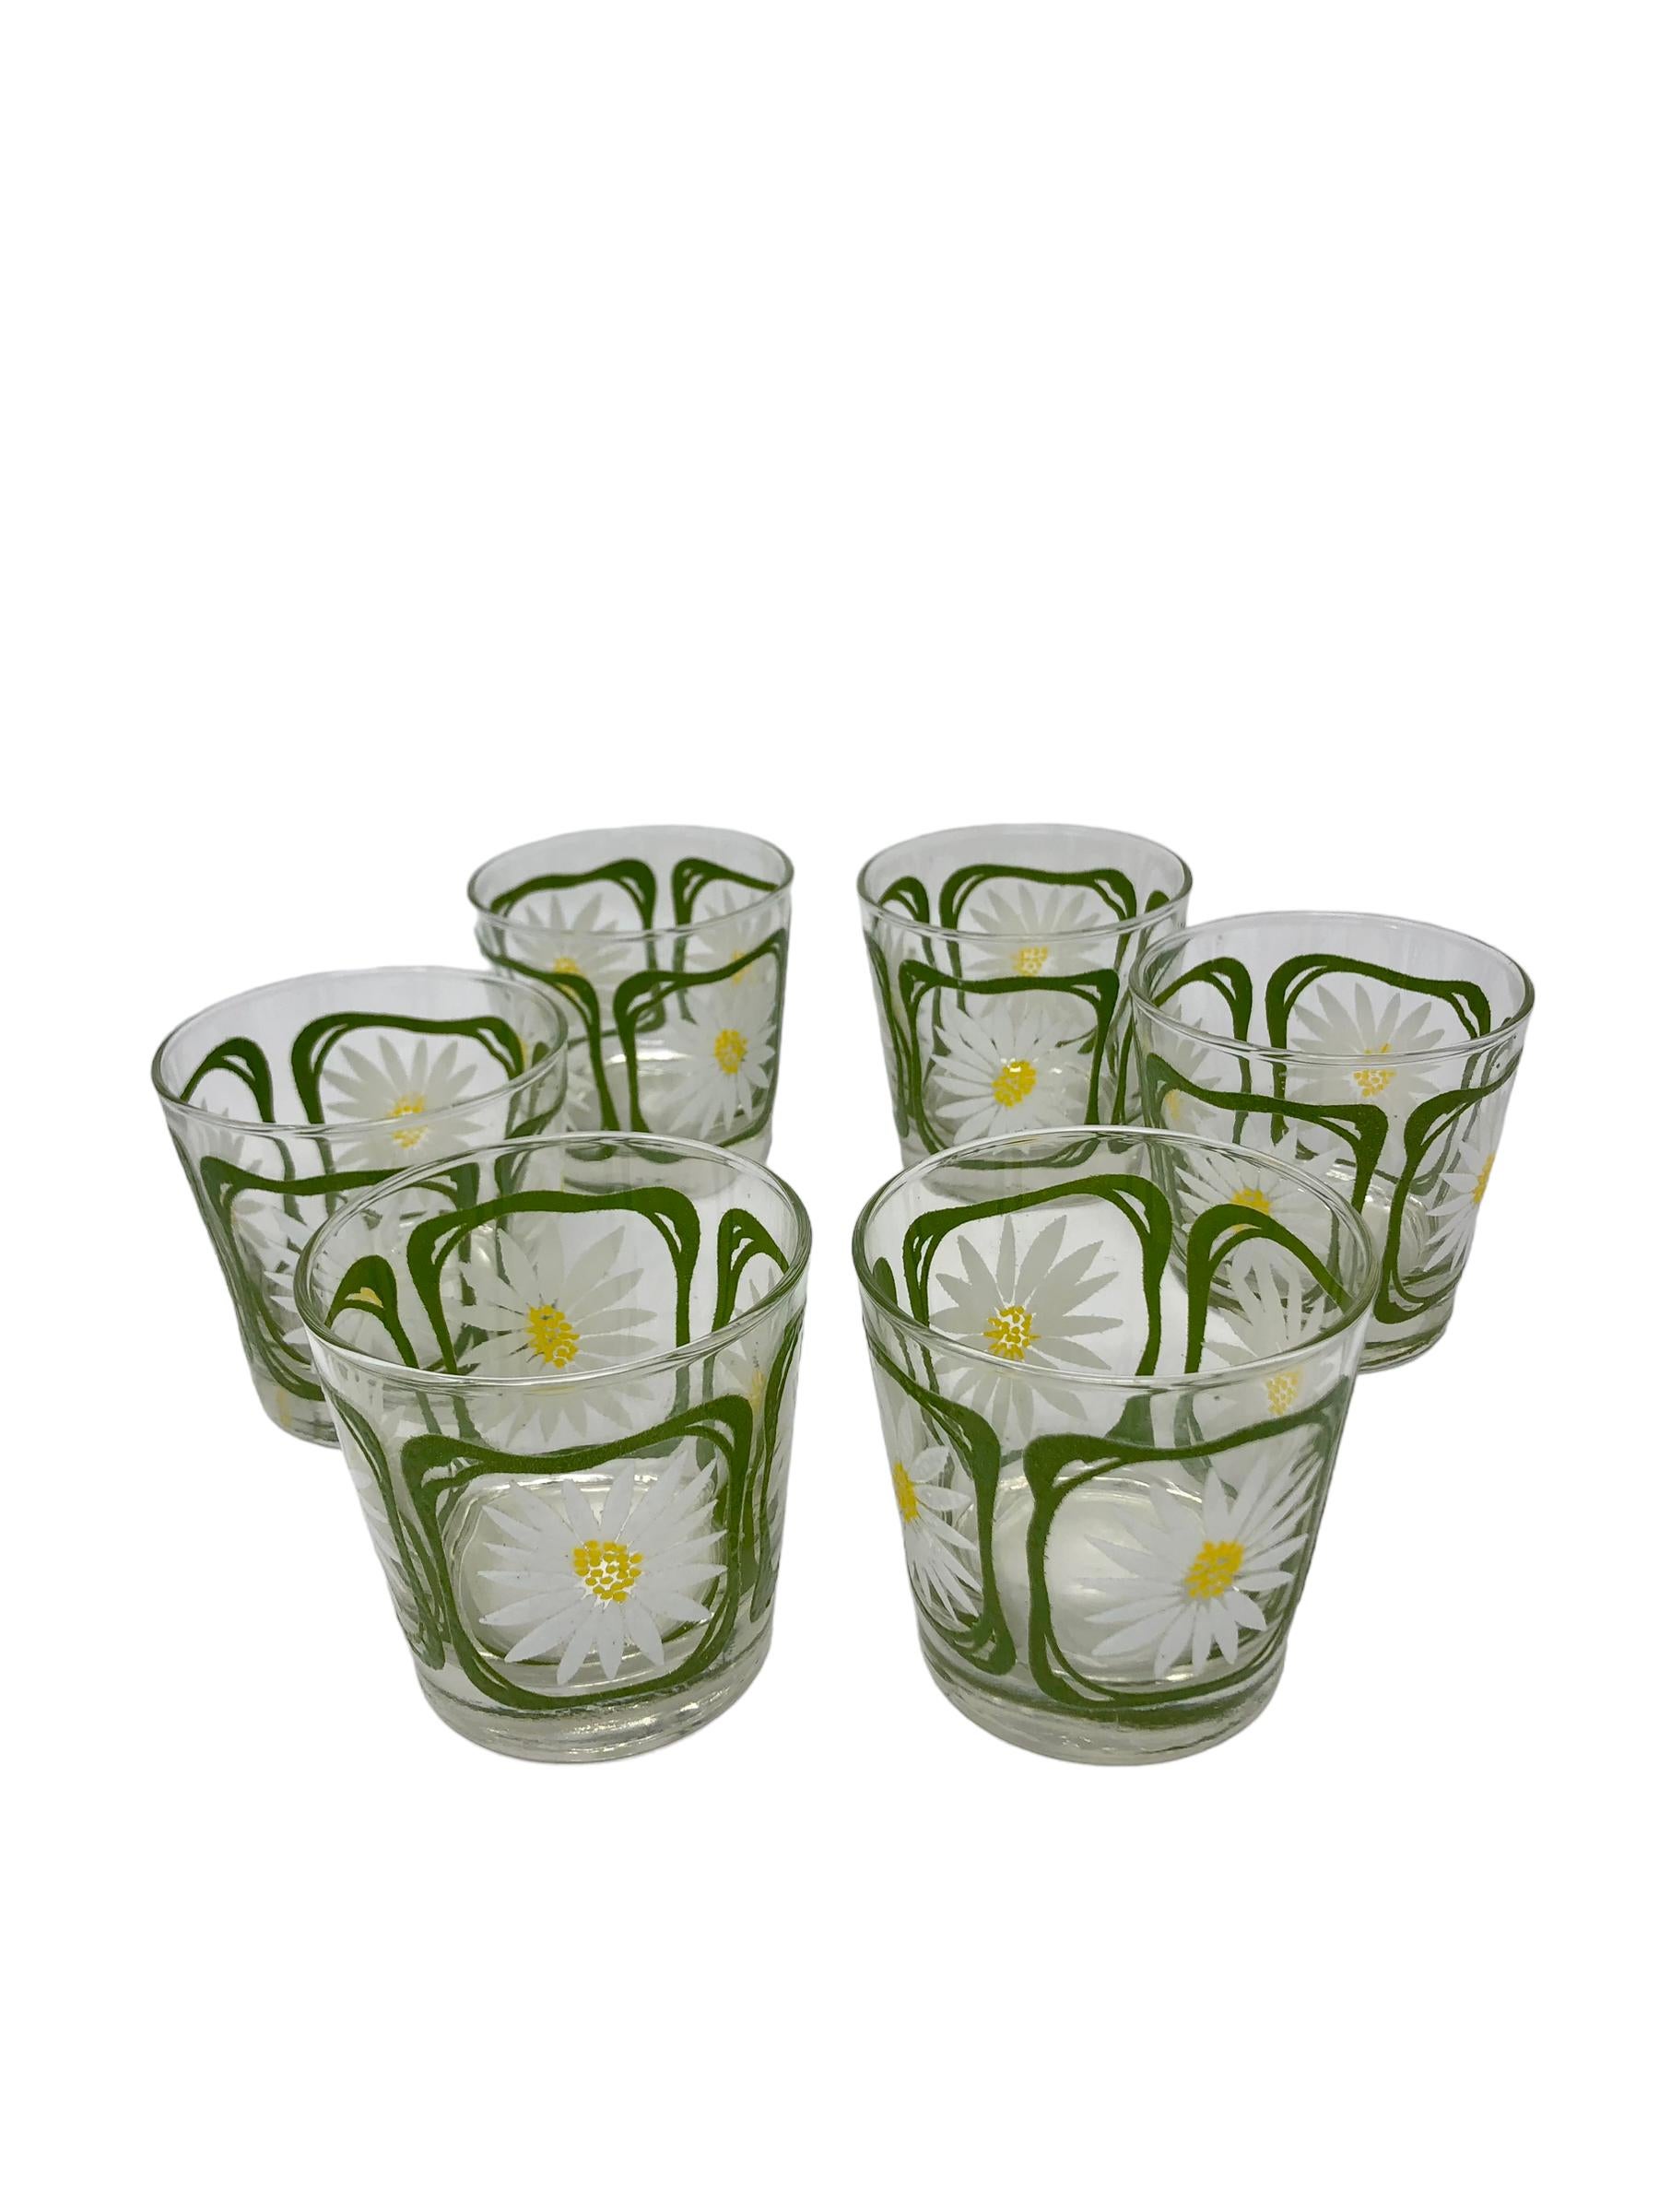 A Set of Six Cheerful Daisy Rocks Glasses by Libbey Glass Co. All in excellent vintage condition.